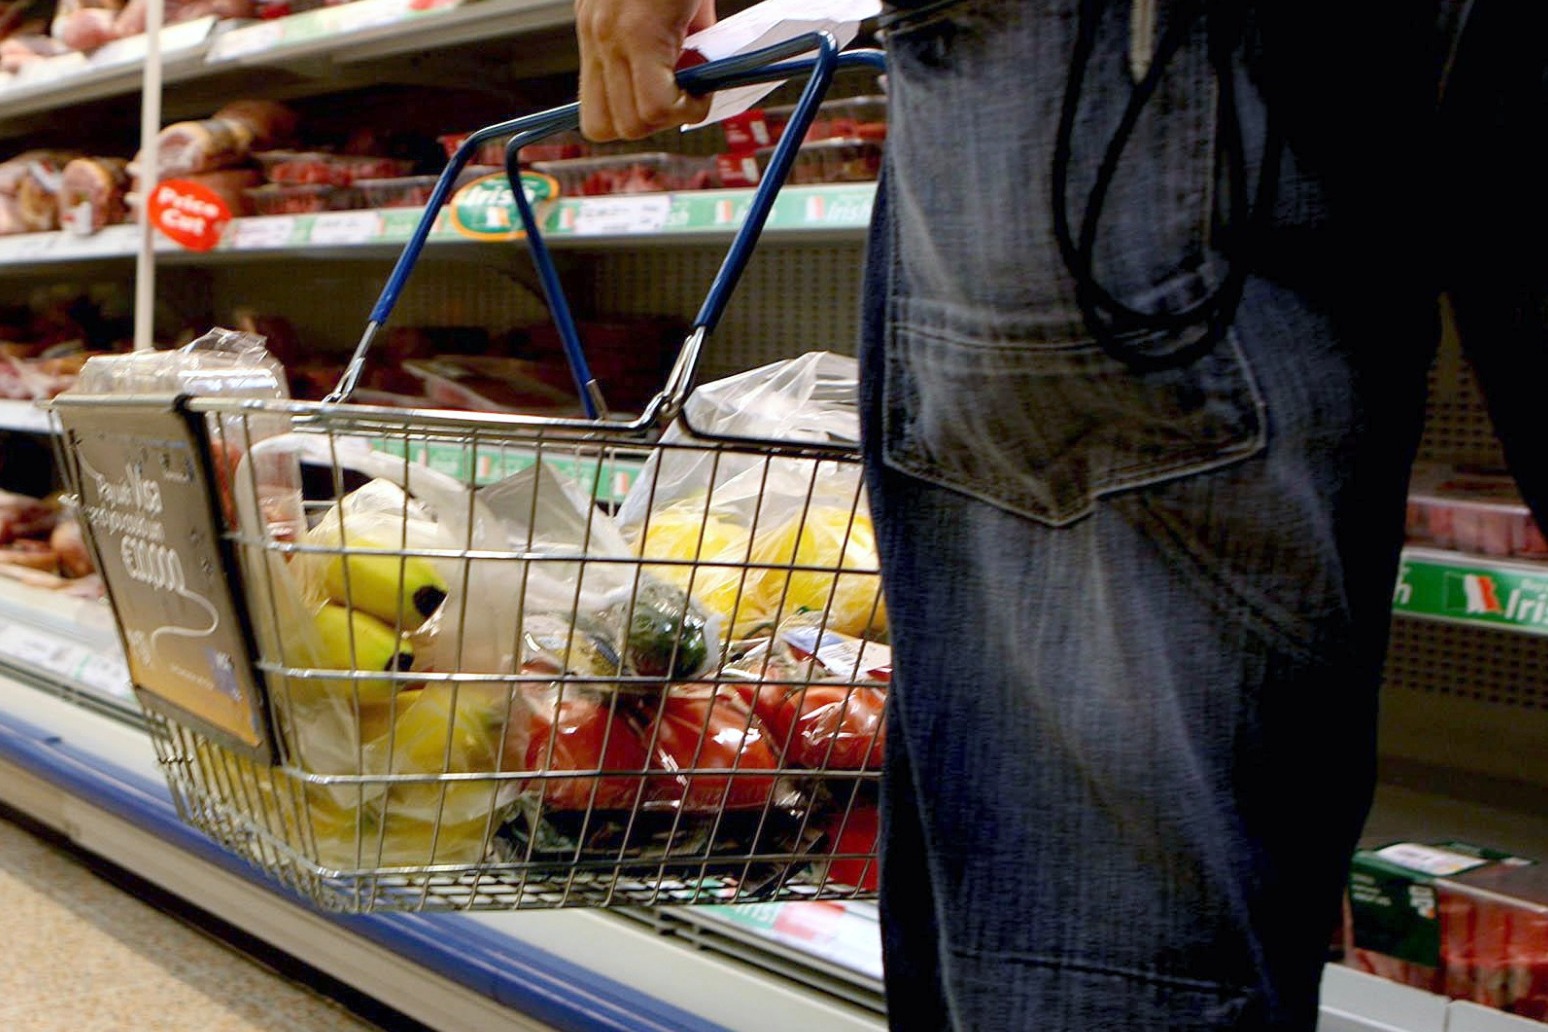 Shopper footfall recovery slows as households face ‘severe economic situation’ 